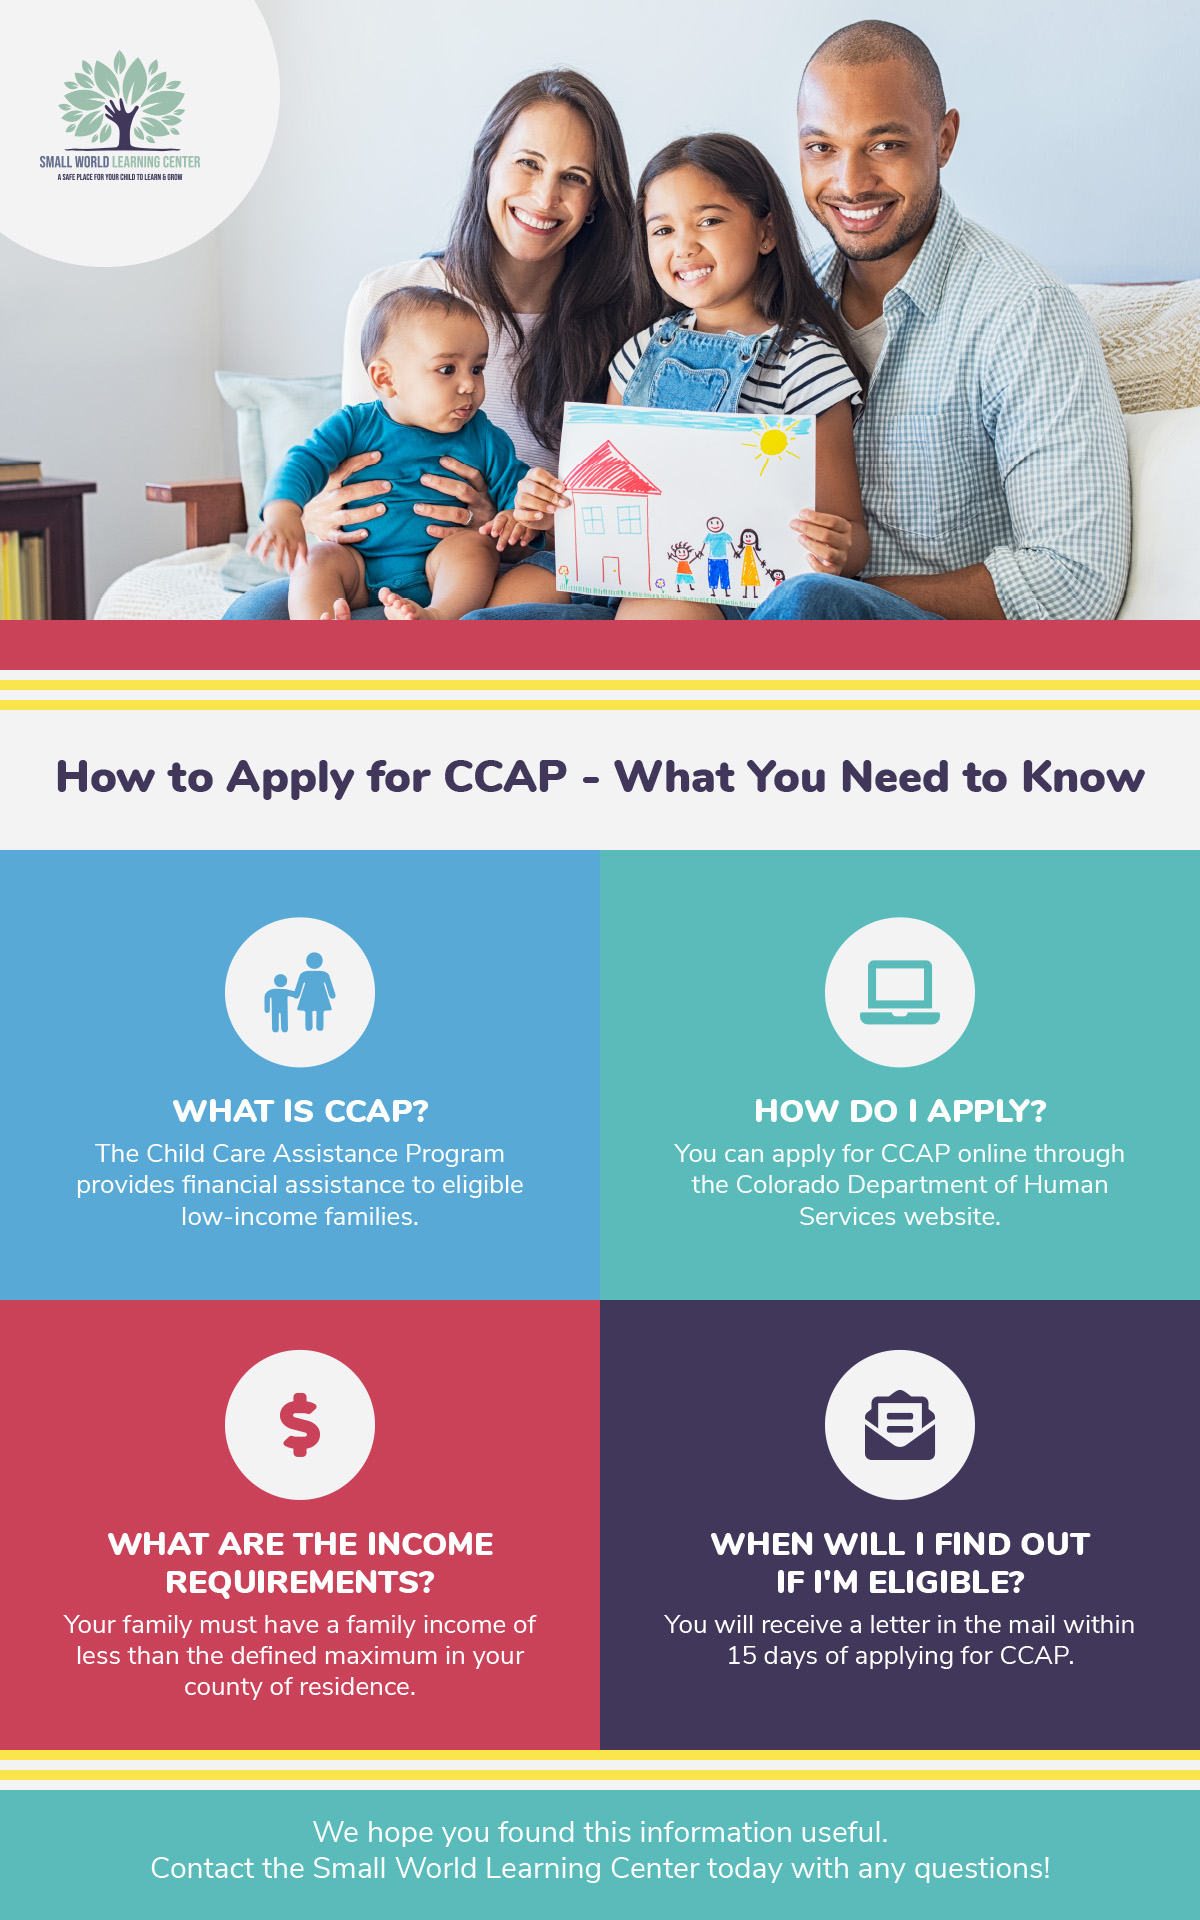 How to Apply for CCAP - What You Need to Know Infographic